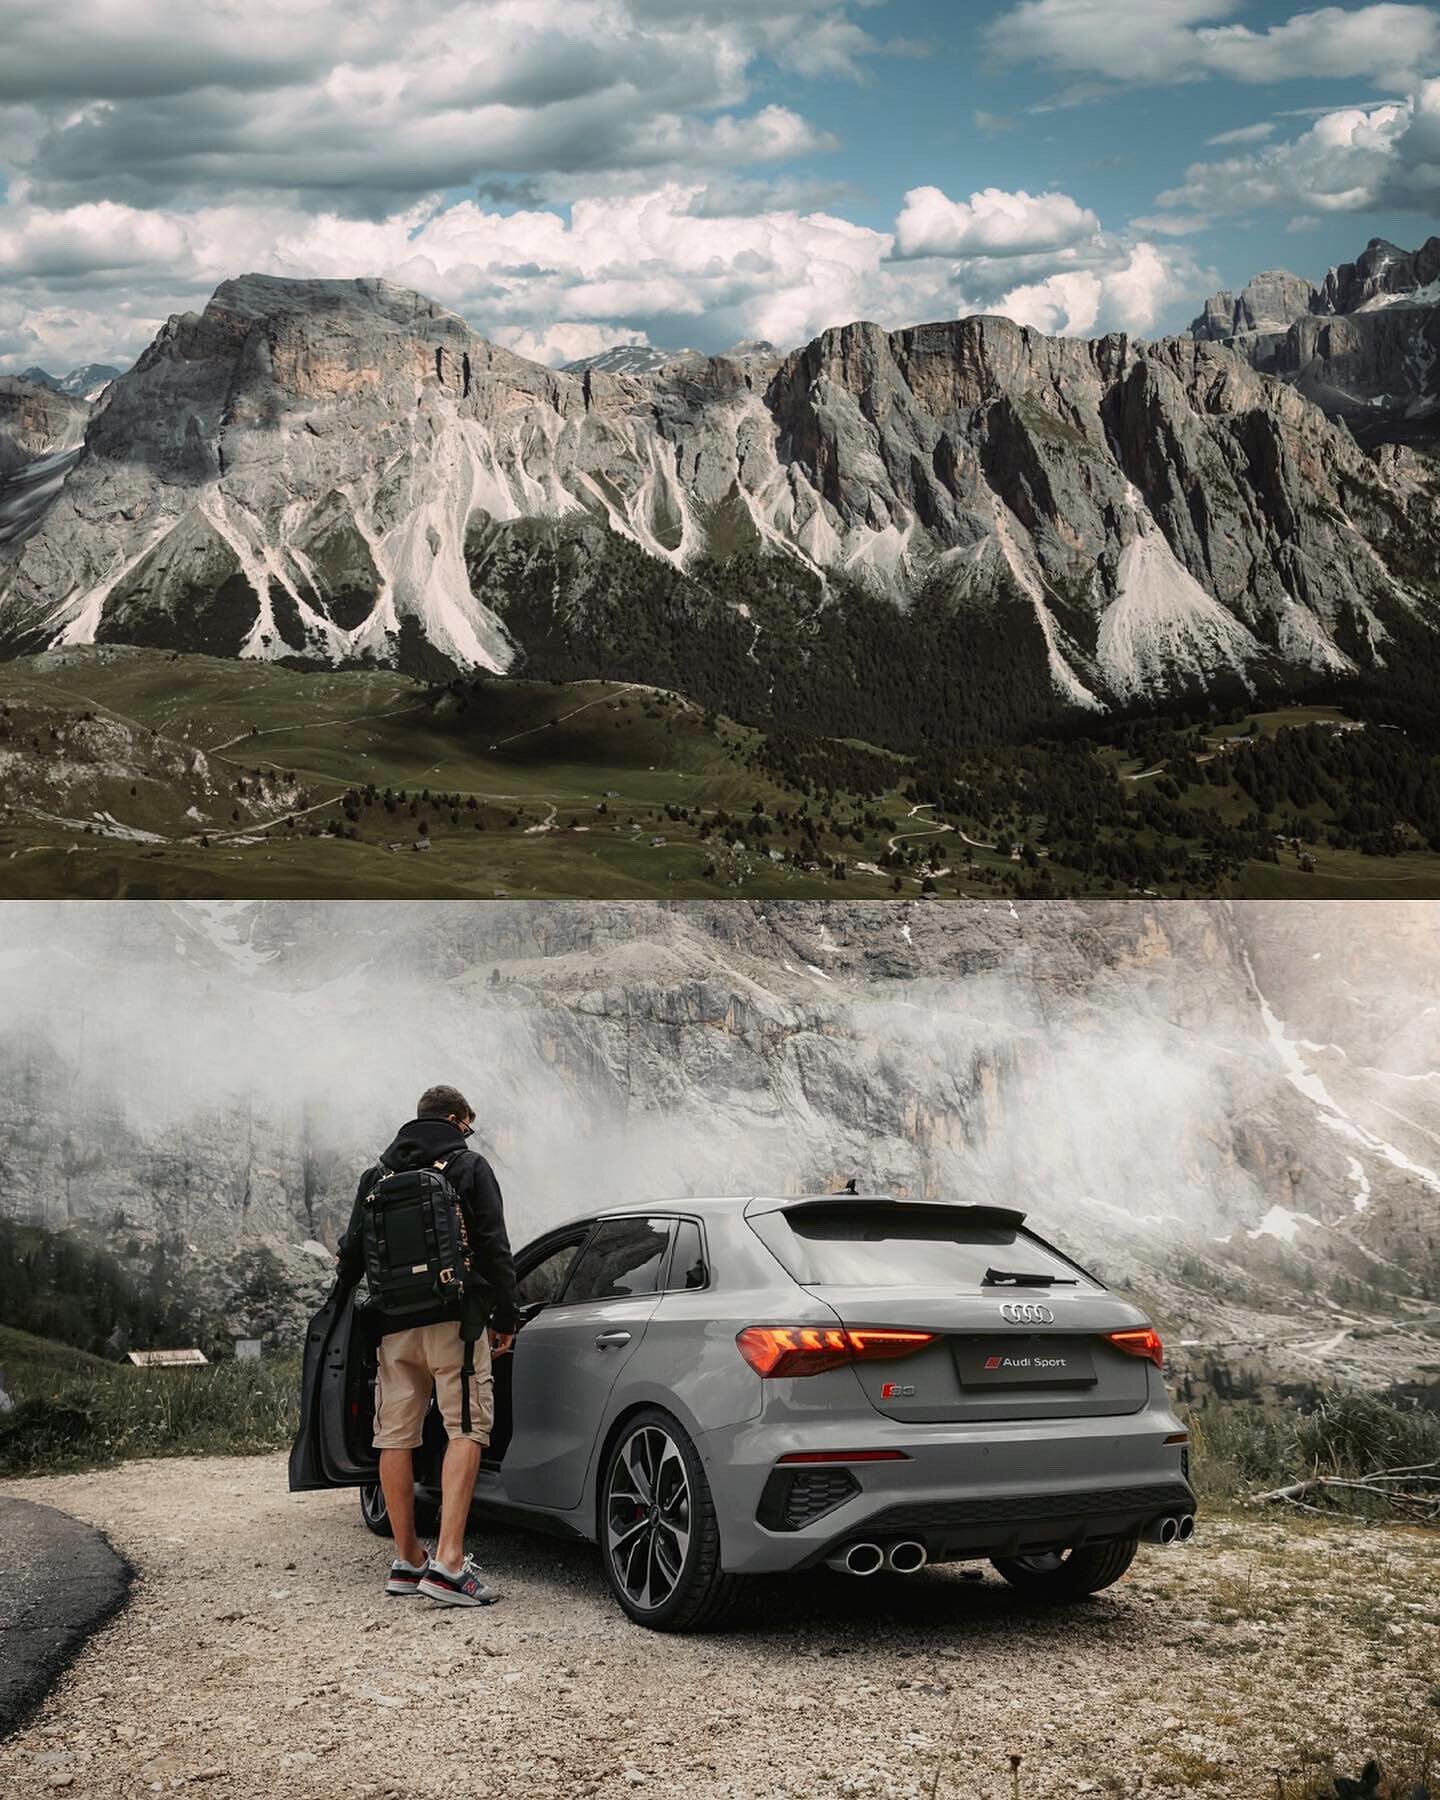 Back in Europe and very much looking forward to spending some time on the mountain roads again in the coming months. Summer can&rsquo;t come soon enough! Who else is excited to road trip? 😎

Edited with @care4art.co

#hellofrom #italy #dolomites